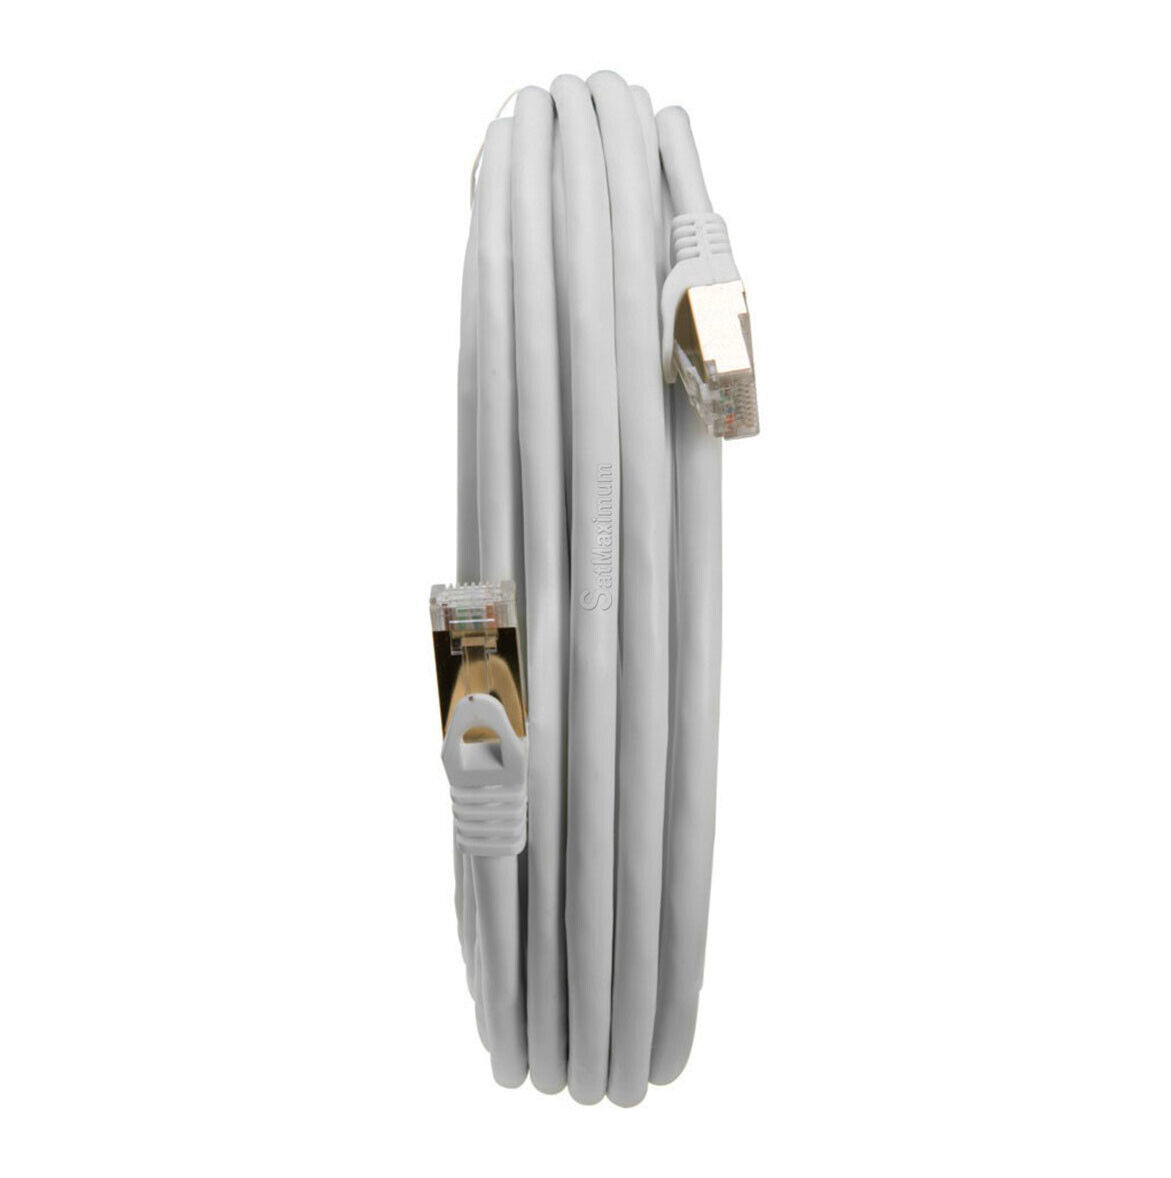 Cat7 S/FTP Ethernet Patch Cord High Speed LAN Network Cable Gray 25ft -200ft LOT